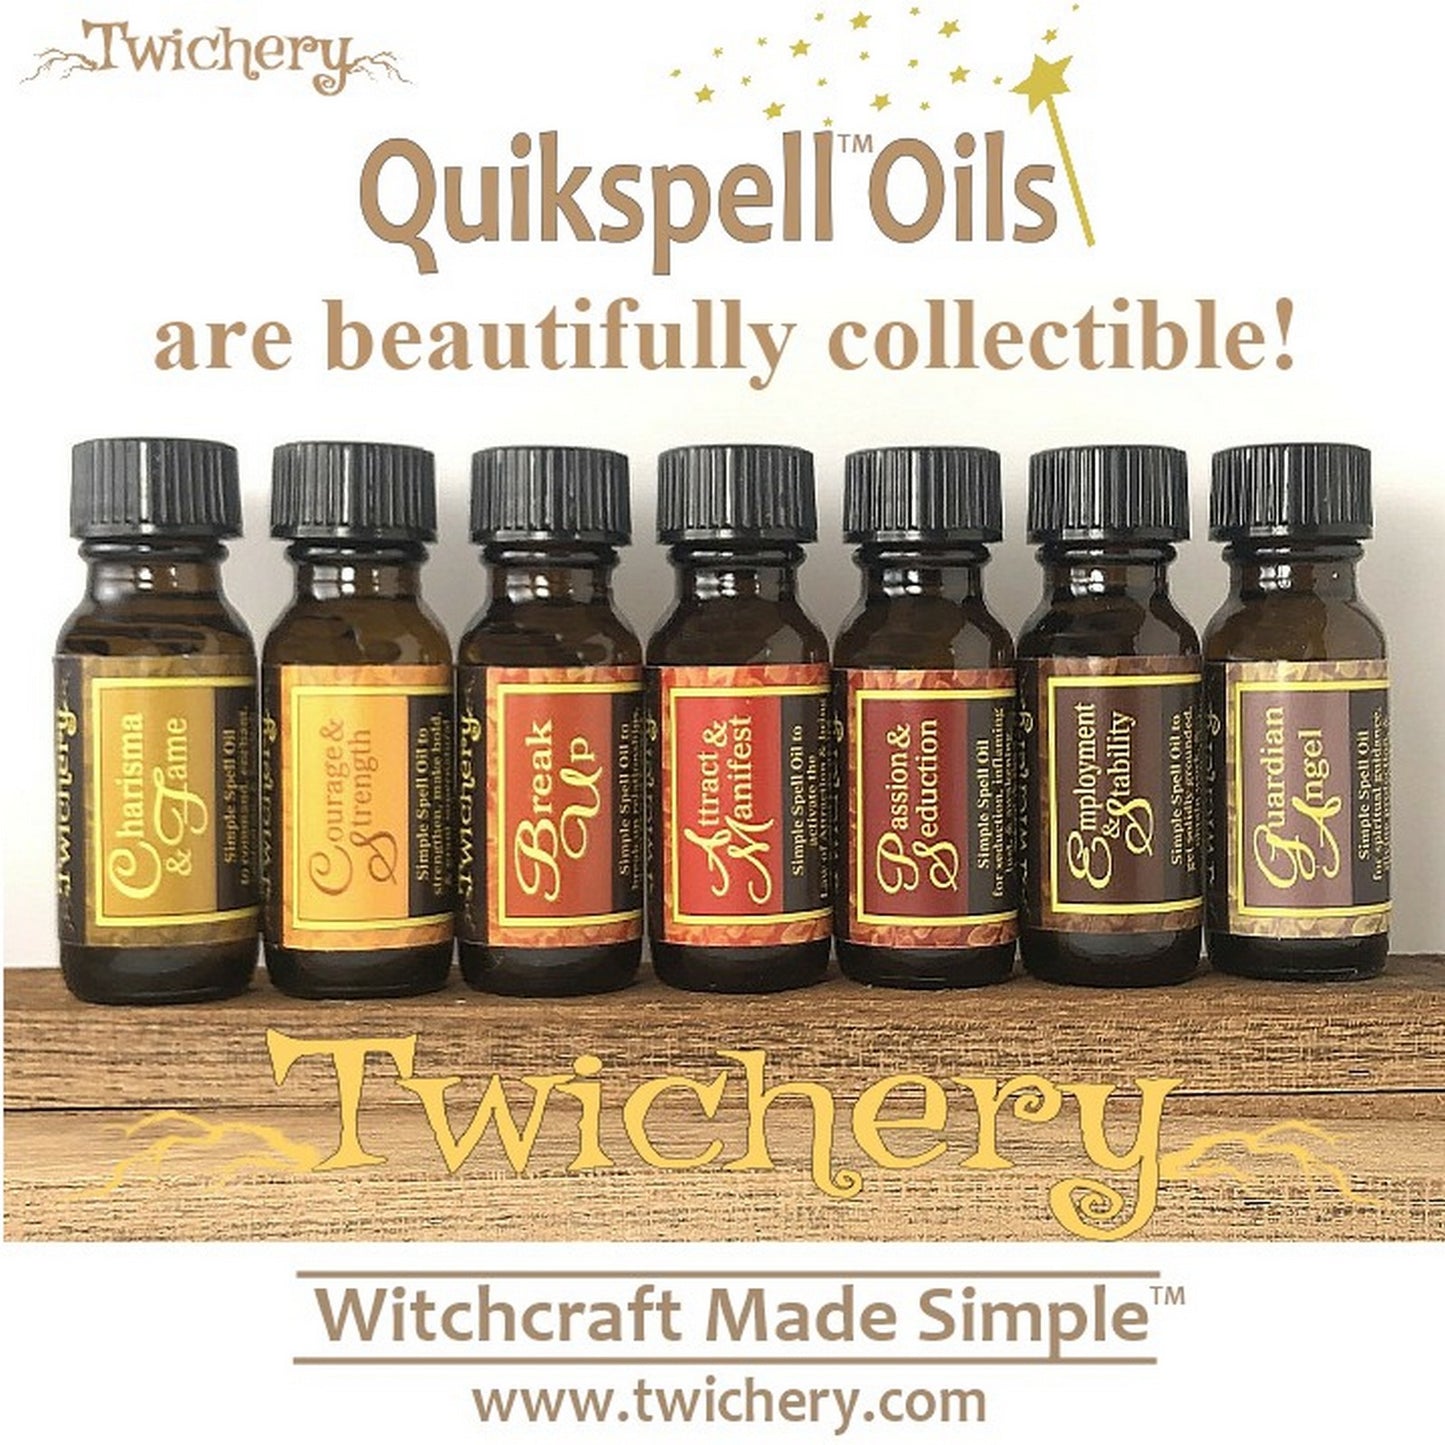 Twichery Quikspell Oils are the fastest conjure on the market. Hoodoo, Voodoo, Wicca, Pagan Witchcraft Made Simple